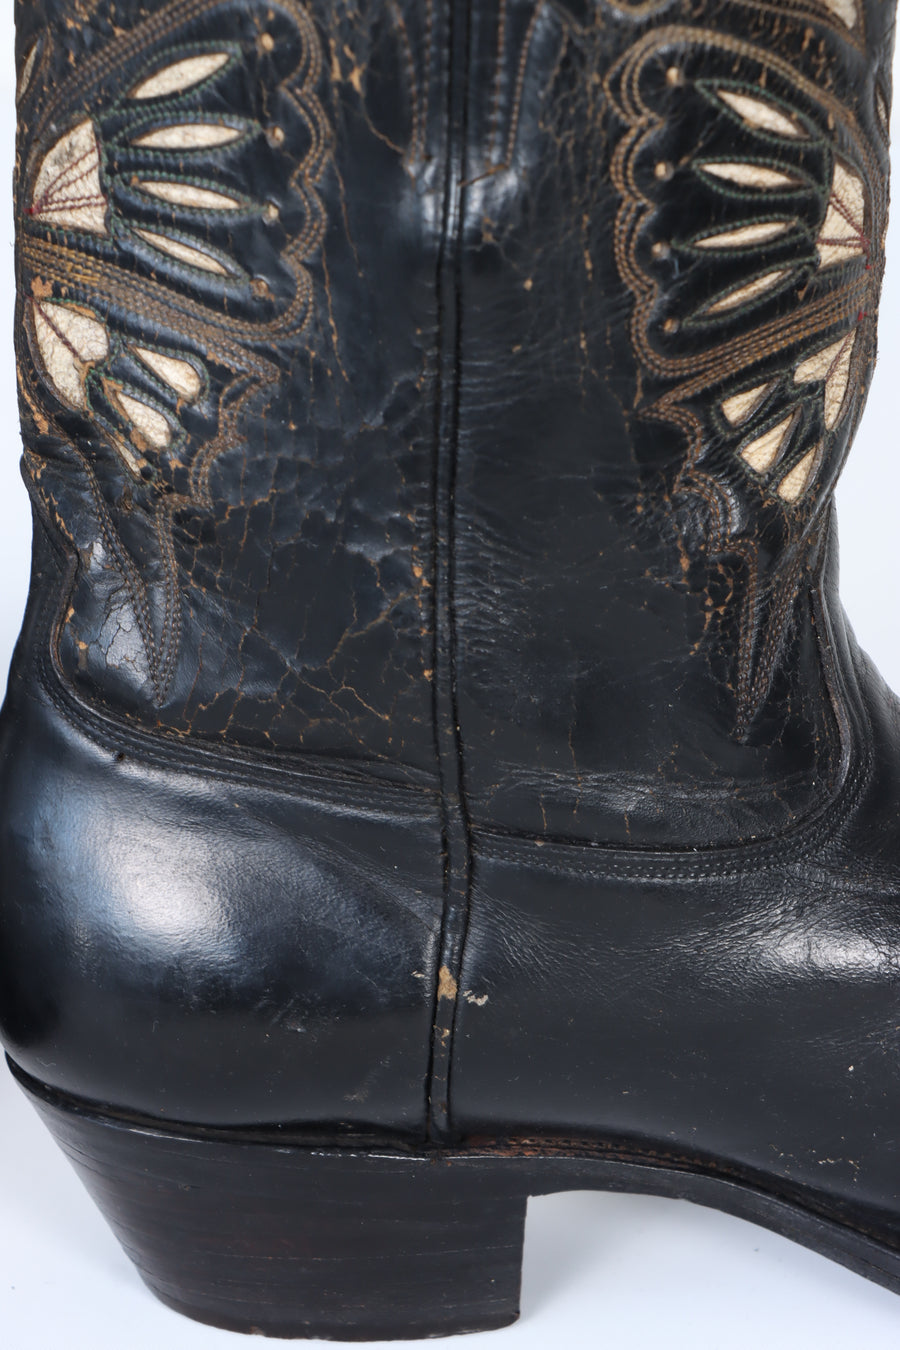 Antique 1920/30s Butterfly Inlay Black Leather Cowboy Boots (10.5)